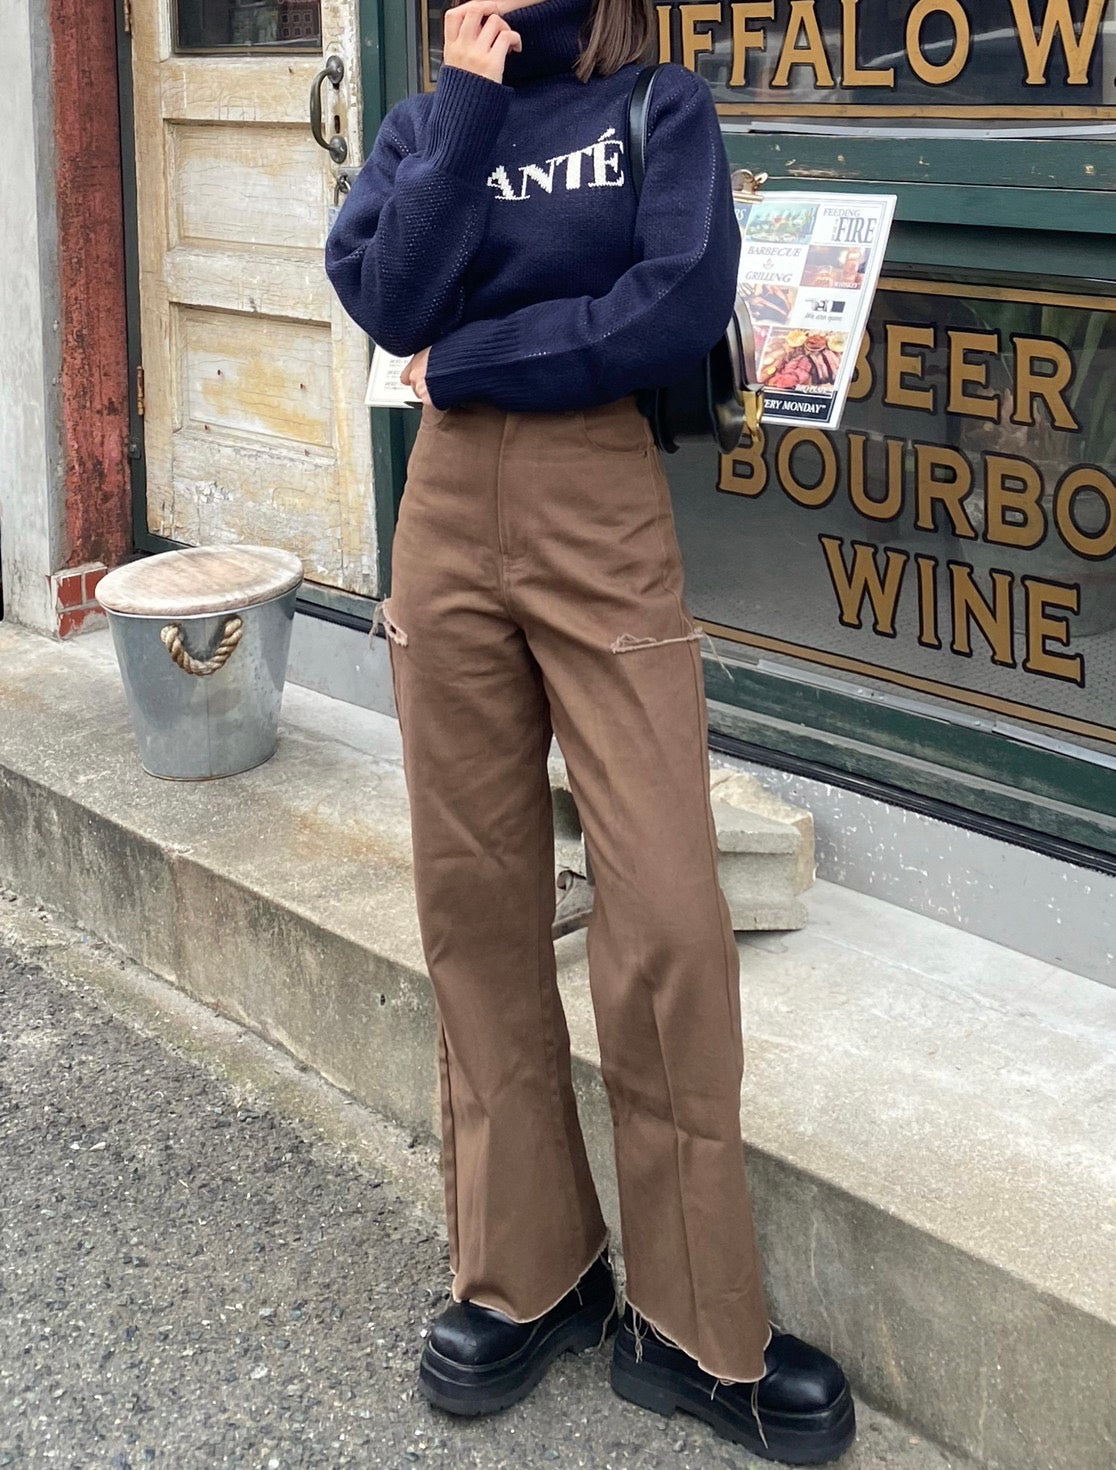 Twill fit flare pants